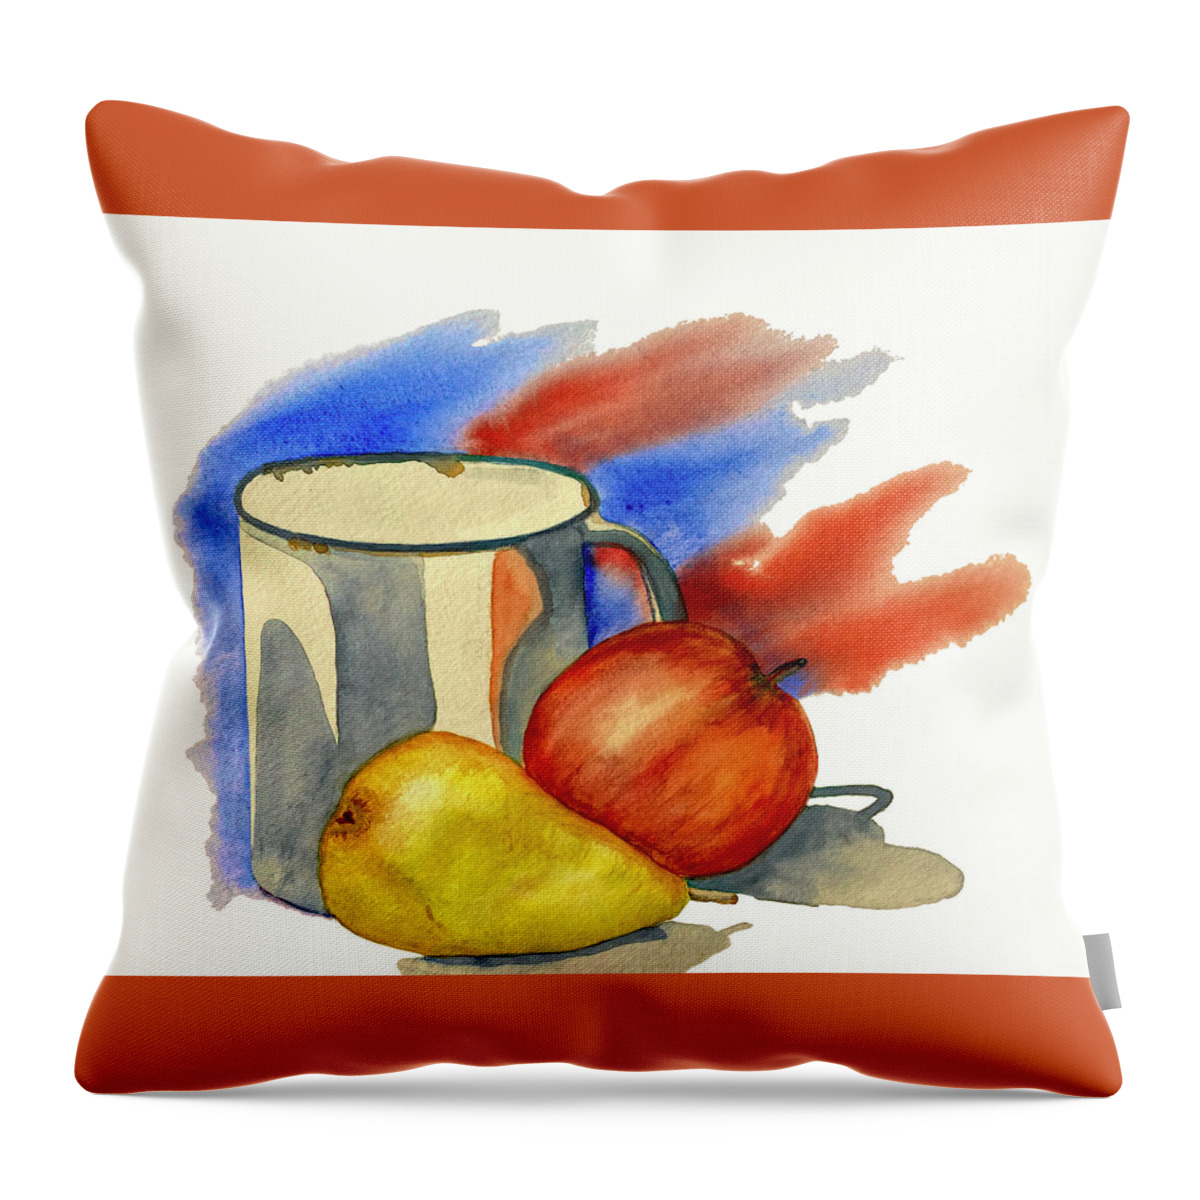 Still Life Throw Pillow featuring the painting Mug and Fruit Still Life by Deborah League